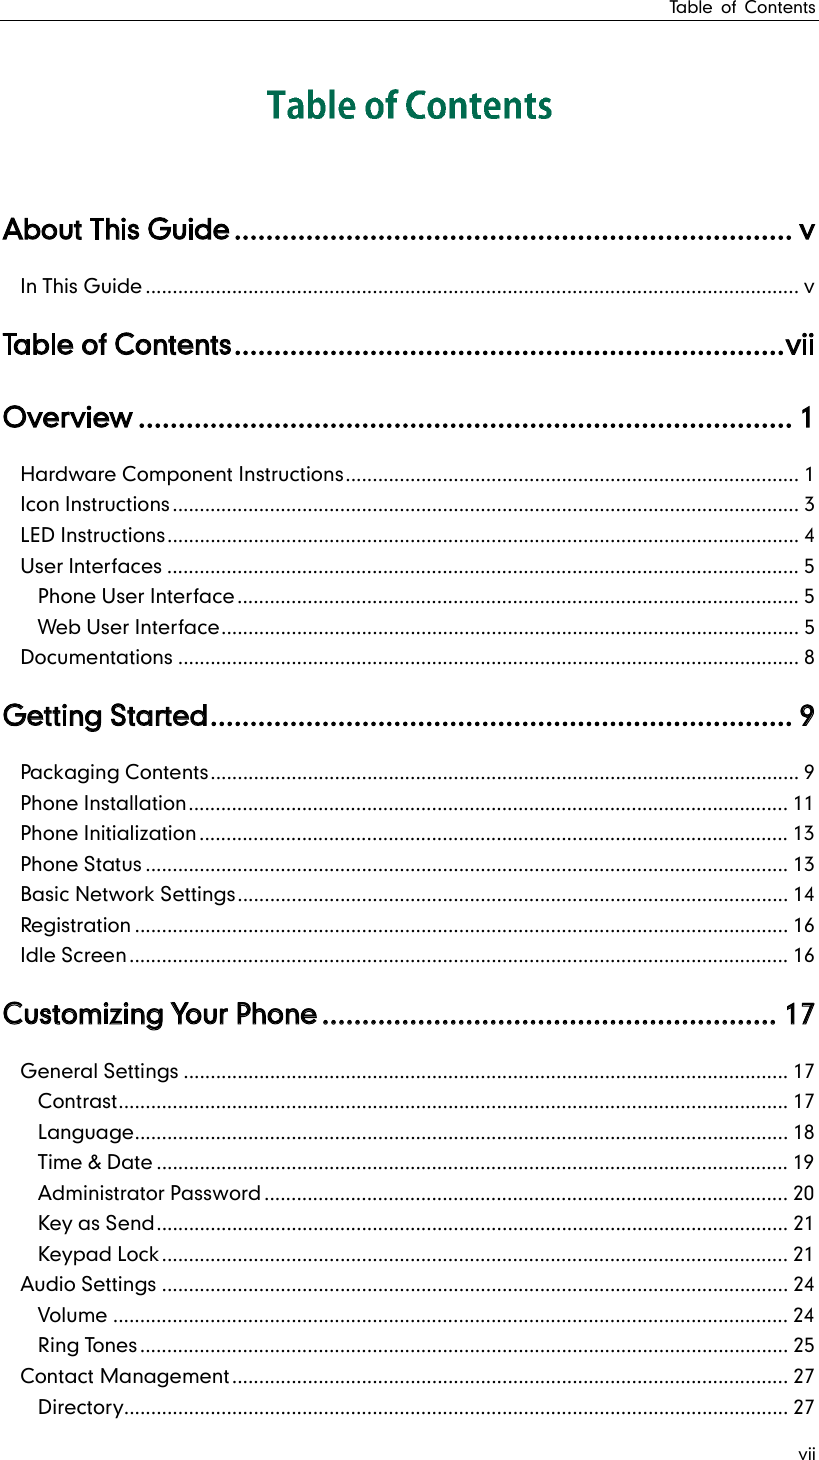 Table of Contents vii About This Guide ...................................................................... v In This Guide ......................................................................................................................... v Table of Contents ..................................................................... v i i  O v e r v i e w  .................................................................................. 1 Hardware Component Instructions .................................................................................... 1 Icon Instructions .................................................................................................................... 3 LED Instructions ..................................................................................................................... 4 User Interfaces ..................................................................................................................... 5 Phone User Interface ........................................................................................................ 5 Web User Interface ........................................................................................................... 5 Documentations ................................................................................................................... 8 Getting Started ......................................................................... 9 Packaging Contents ............................................................................................................. 9 Phone Installation ............................................................................................................... 11 Phone Initialization ............................................................................................................. 13 Phone Status ....................................................................................................................... 13 Basic Network Settings ...................................................................................................... 14 Registration ......................................................................................................................... 16 Idle Screen .......................................................................................................................... 16 Customizing Your Phone ......................................................... 17 General Settings ................................................................................................................ 17 Contrast ............................................................................................................................ 17 Language ......................................................................................................................... 18 Time &amp; Date ..................................................................................................................... 19 Administrator Password ................................................................................................. 20 Key as Send ..................................................................................................................... 21 Keypad Lock .................................................................................................................... 21 Audio Settings .................................................................................................................... 24 Volume ............................................................................................................................. 24 Ring Tones ........................................................................................................................ 25 Contact Management ....................................................................................................... 27 Directory........................................................................................................................... 27 